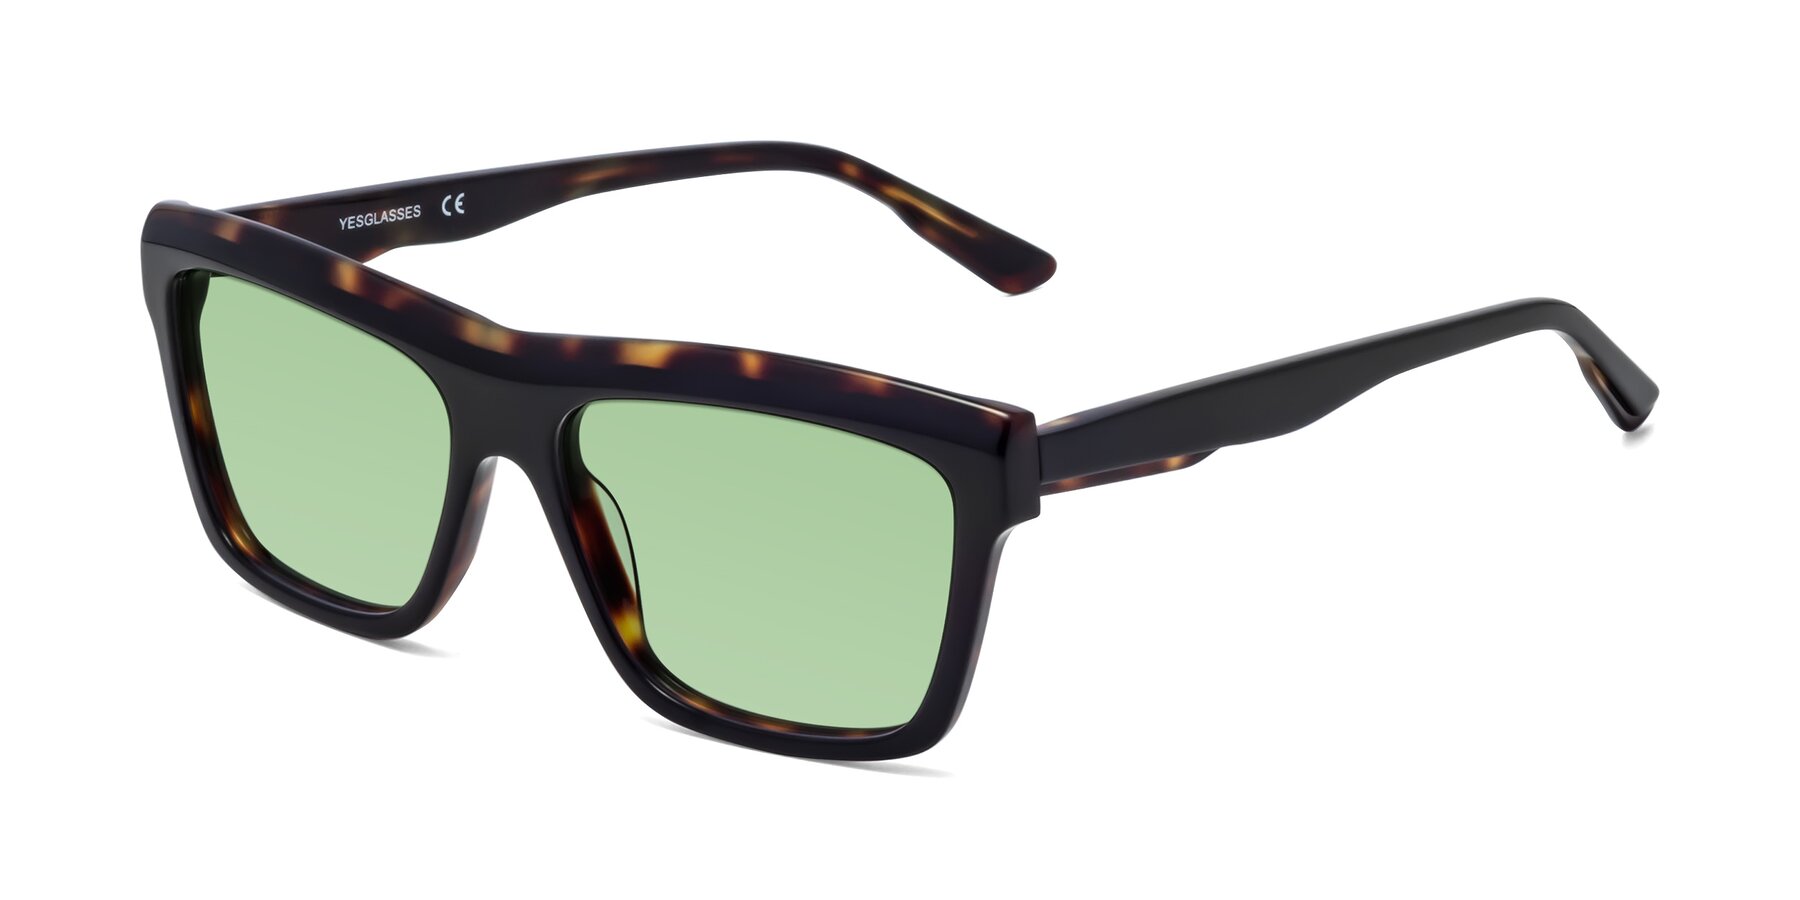 Angle of 1481 in Tortoise with Medium Green Tinted Lenses